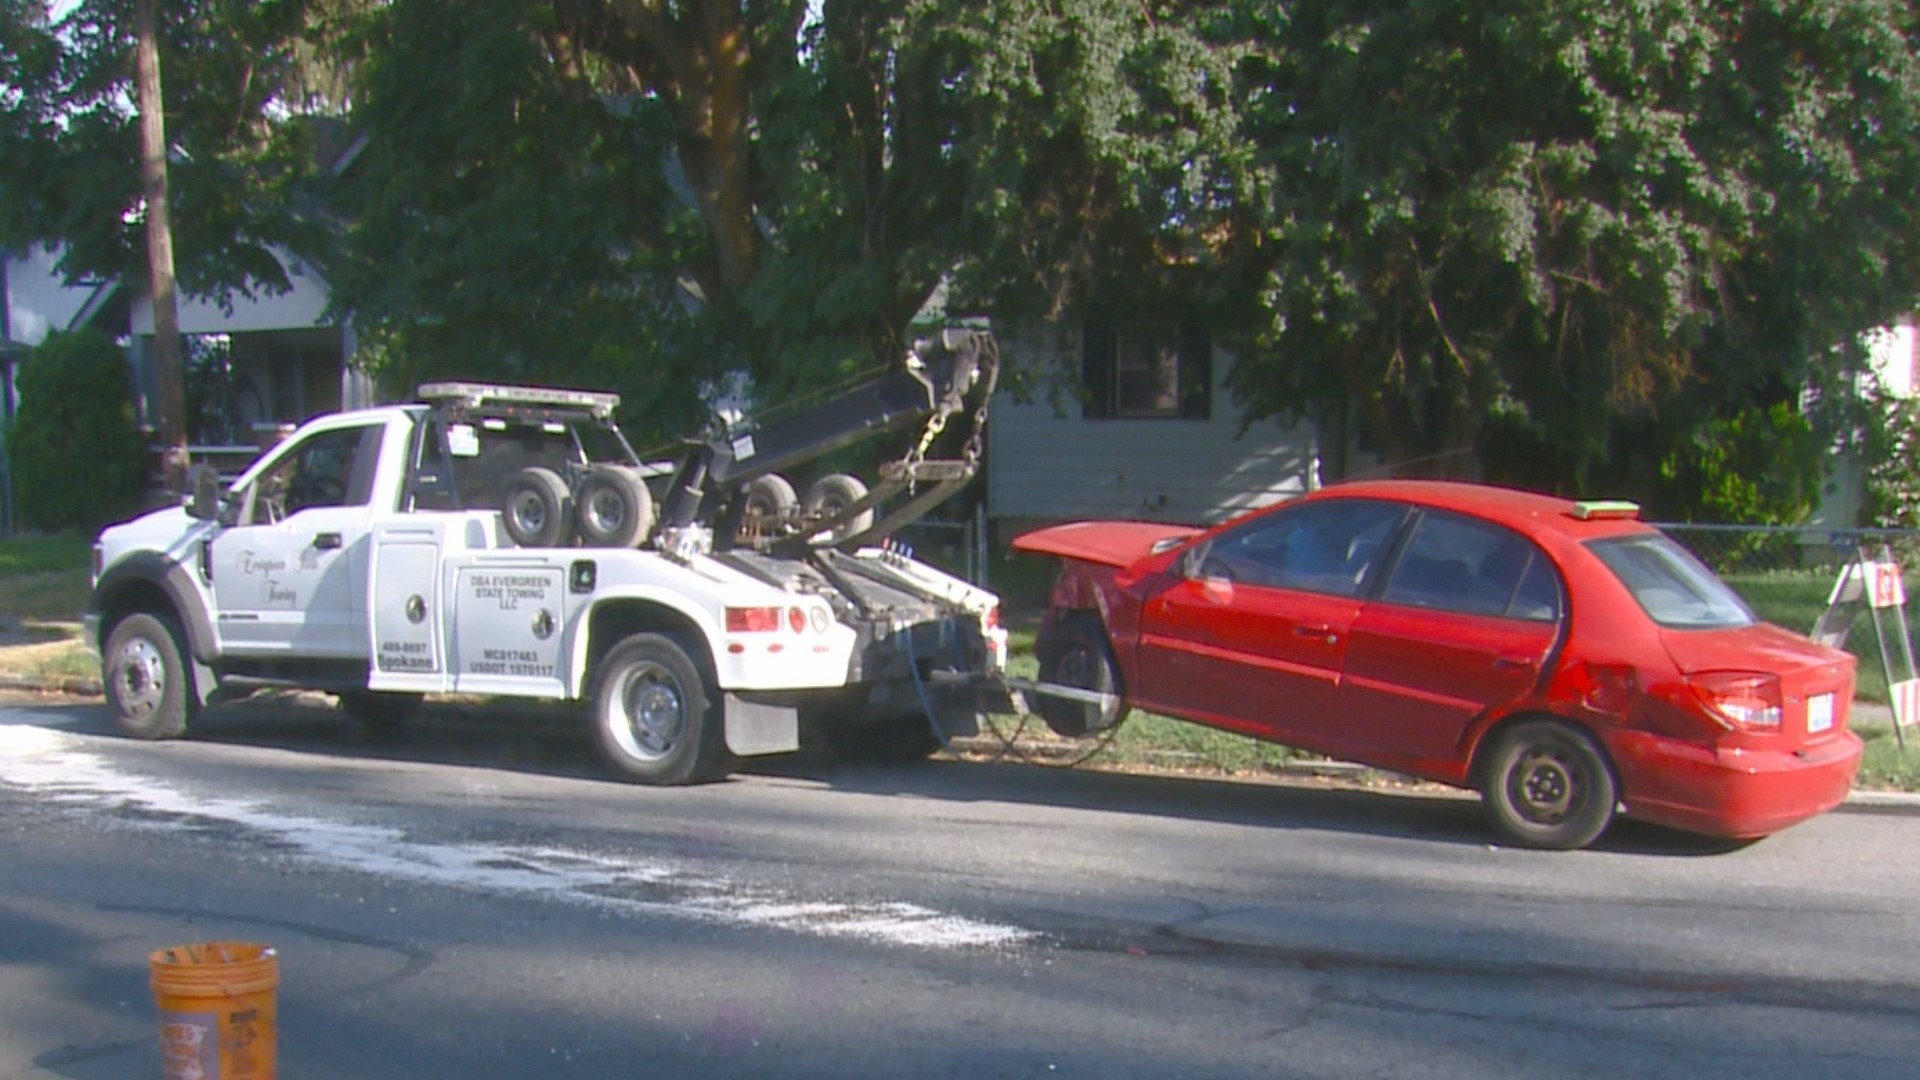 A 12-year-old girl was behind the wheel of a car involved in a crash in Spokane on Tuesday morning, according to Spokane Police.